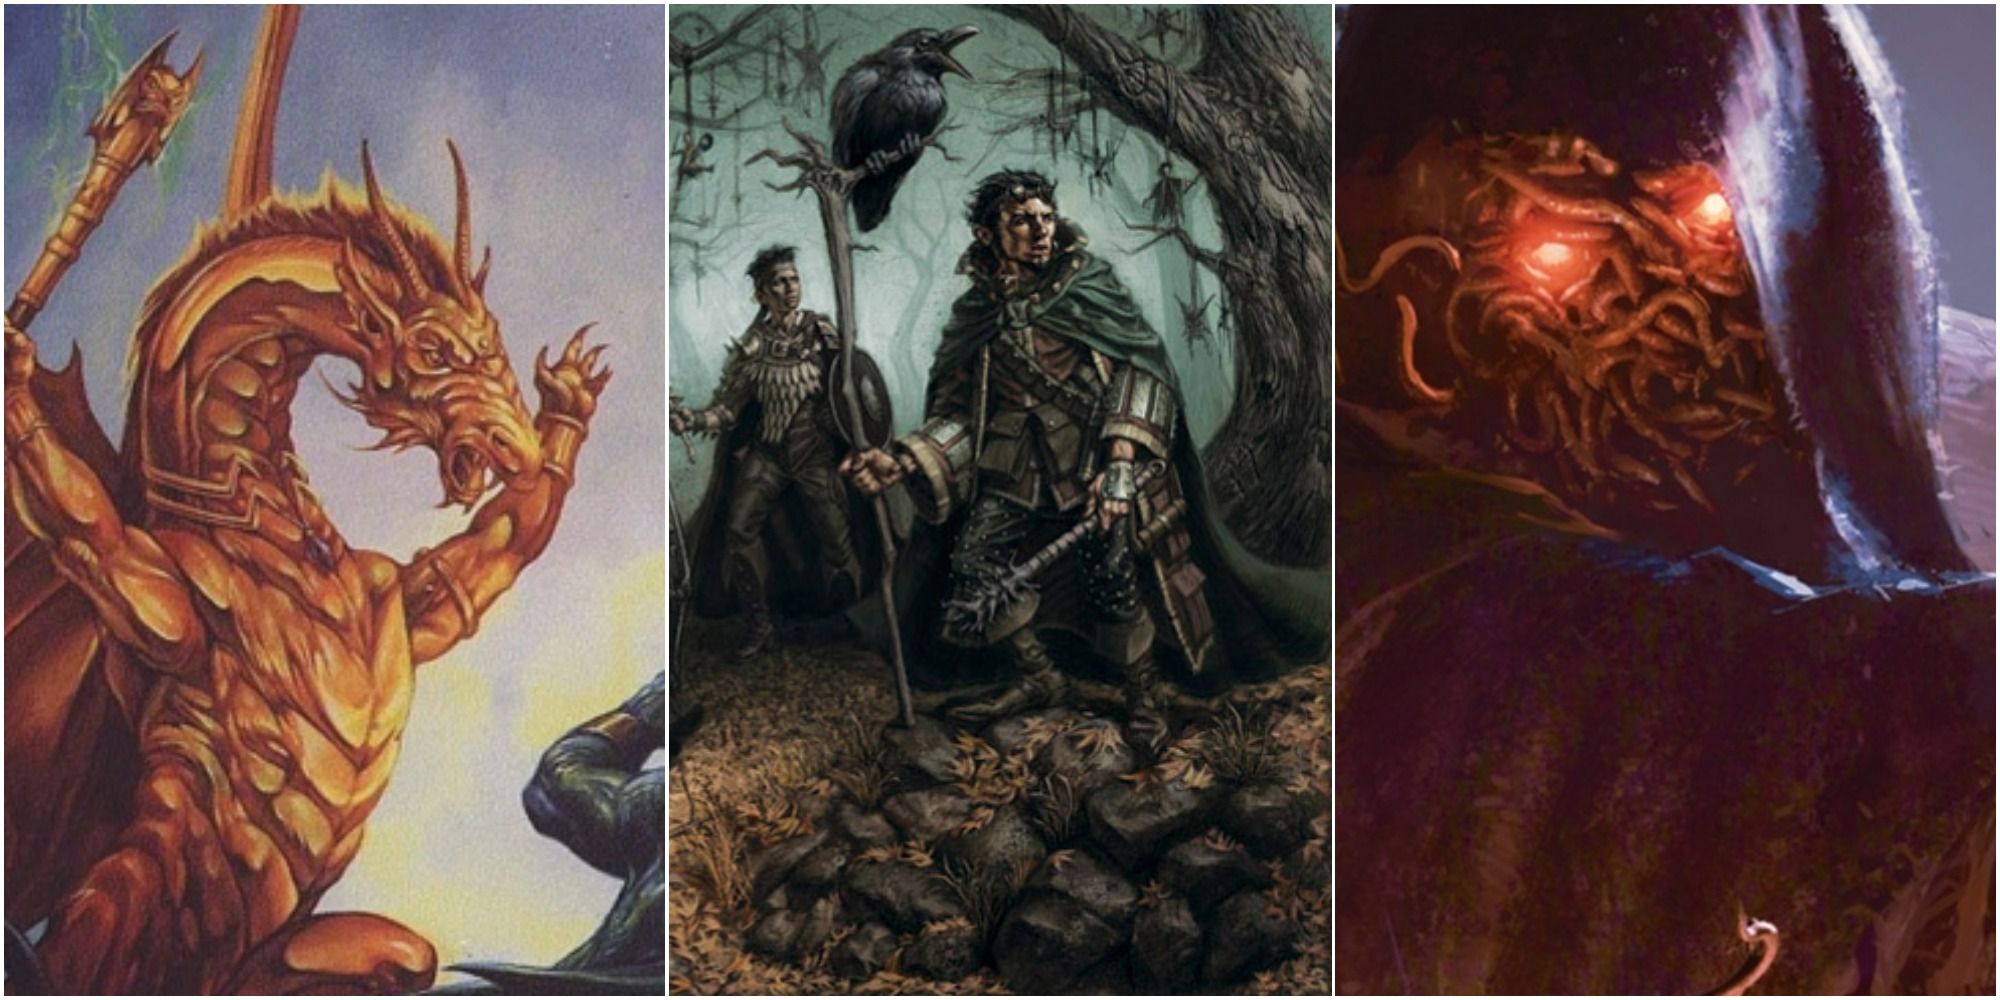 D&D split image a dragon-like creature, two adventurers in a dark wood and a menacing Lovecraftian creature with red glowing eyes